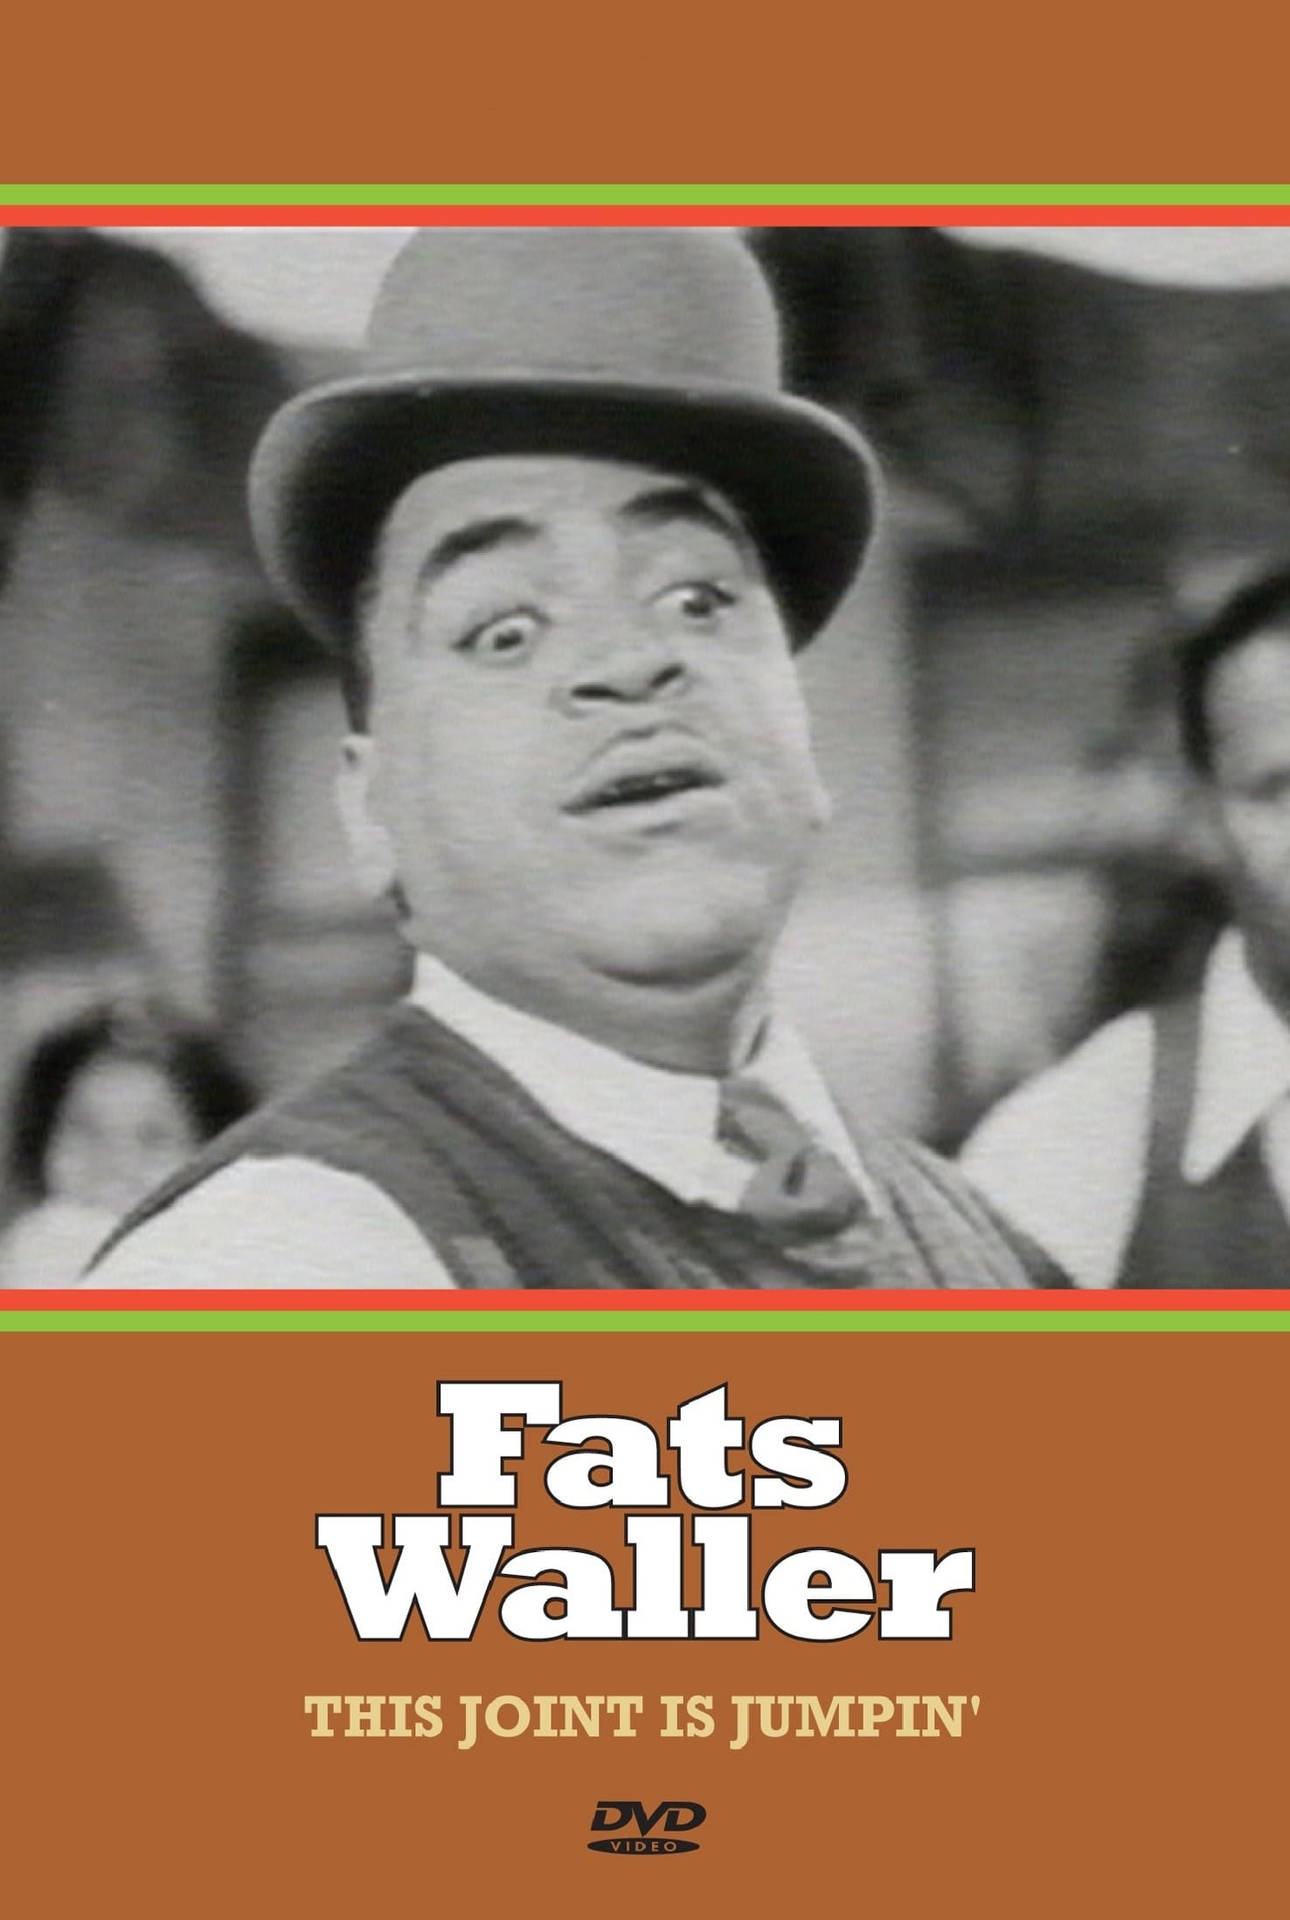 Fats Waller This Joint Is Jumpin' CD Cover Wallpaper